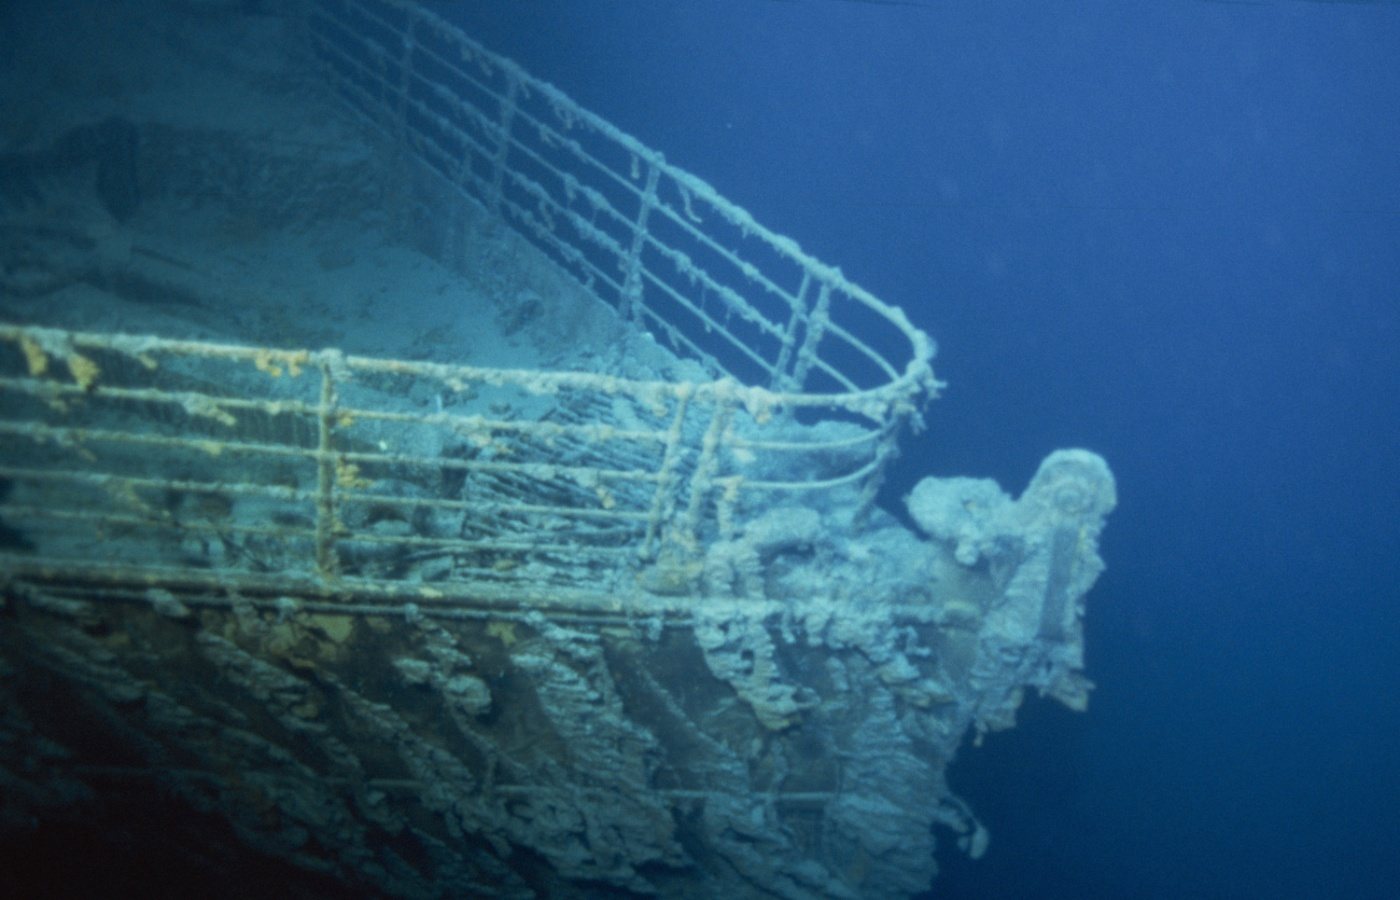 Wreck of the Titanic, which sank on the night of April 14, 1912, off the coast of Newfoundland. 